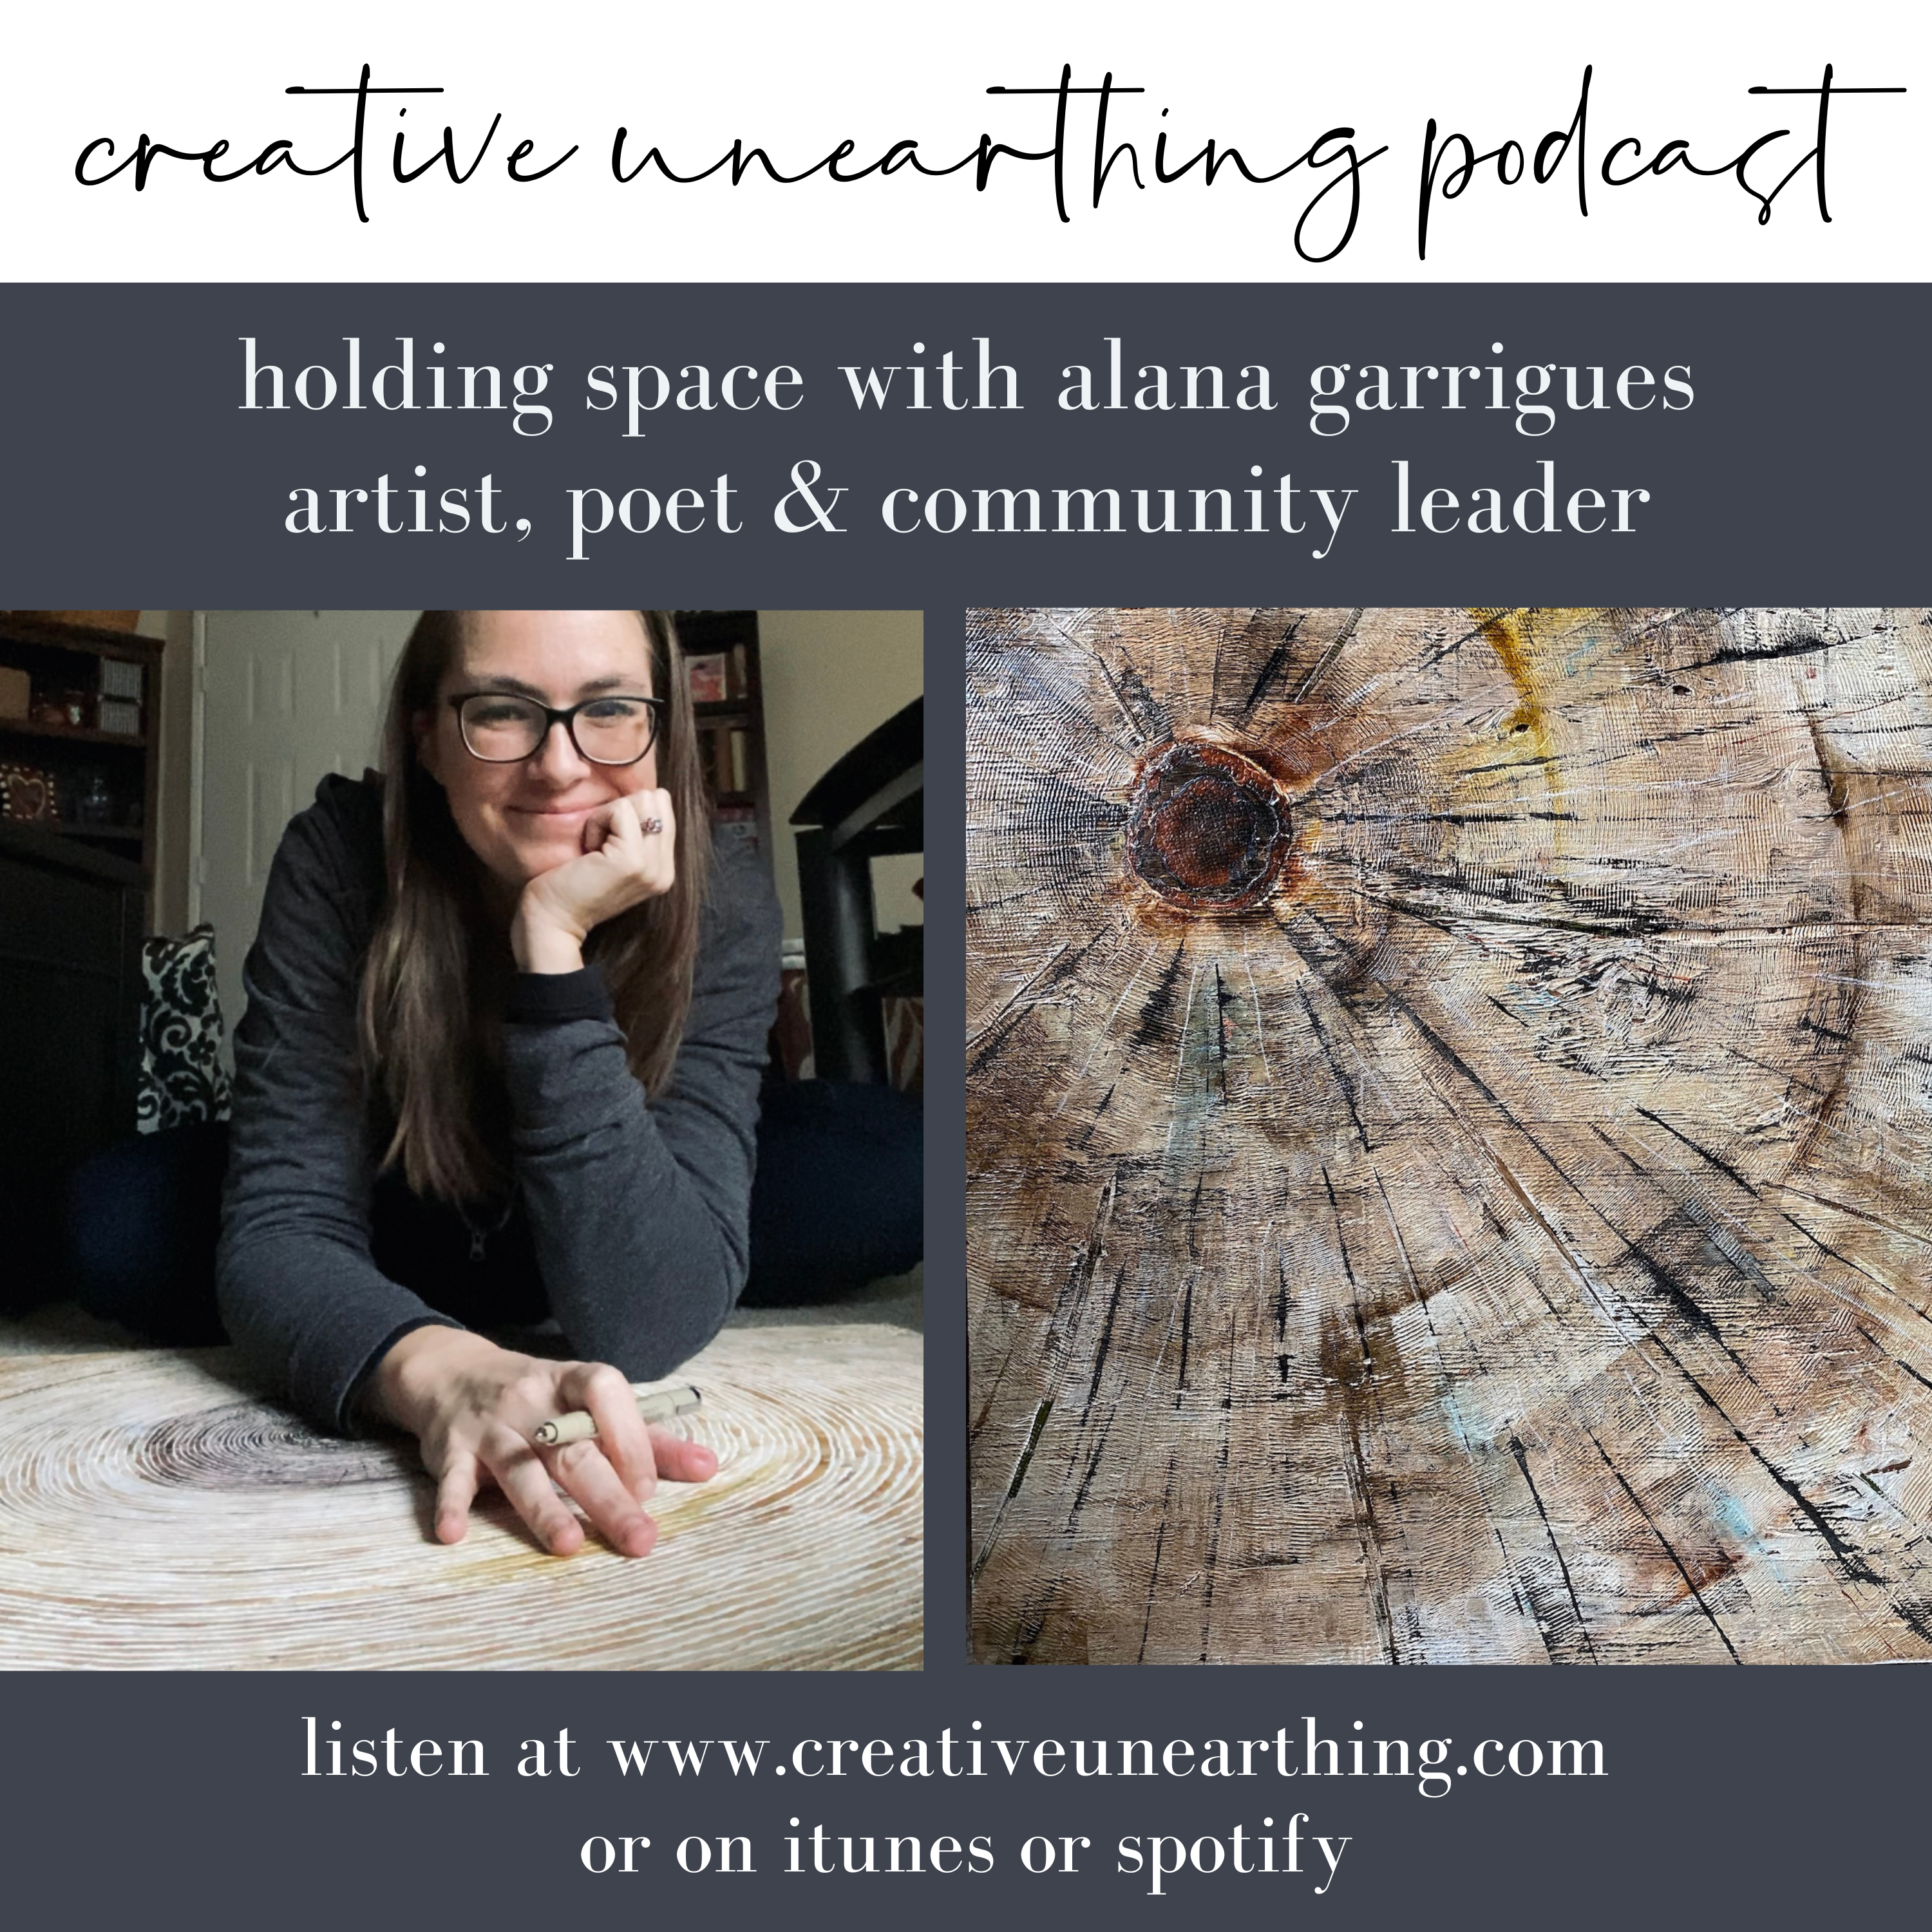 image shows woman painting on the floor of her apartment, next to an image of a tree burst painting she has created. words on image identify it is an infographic for Creative Unearthing Podcast episode 34, with host Emma Freeman and guest Alana Garrigues (pictured), for a conversation about holding space